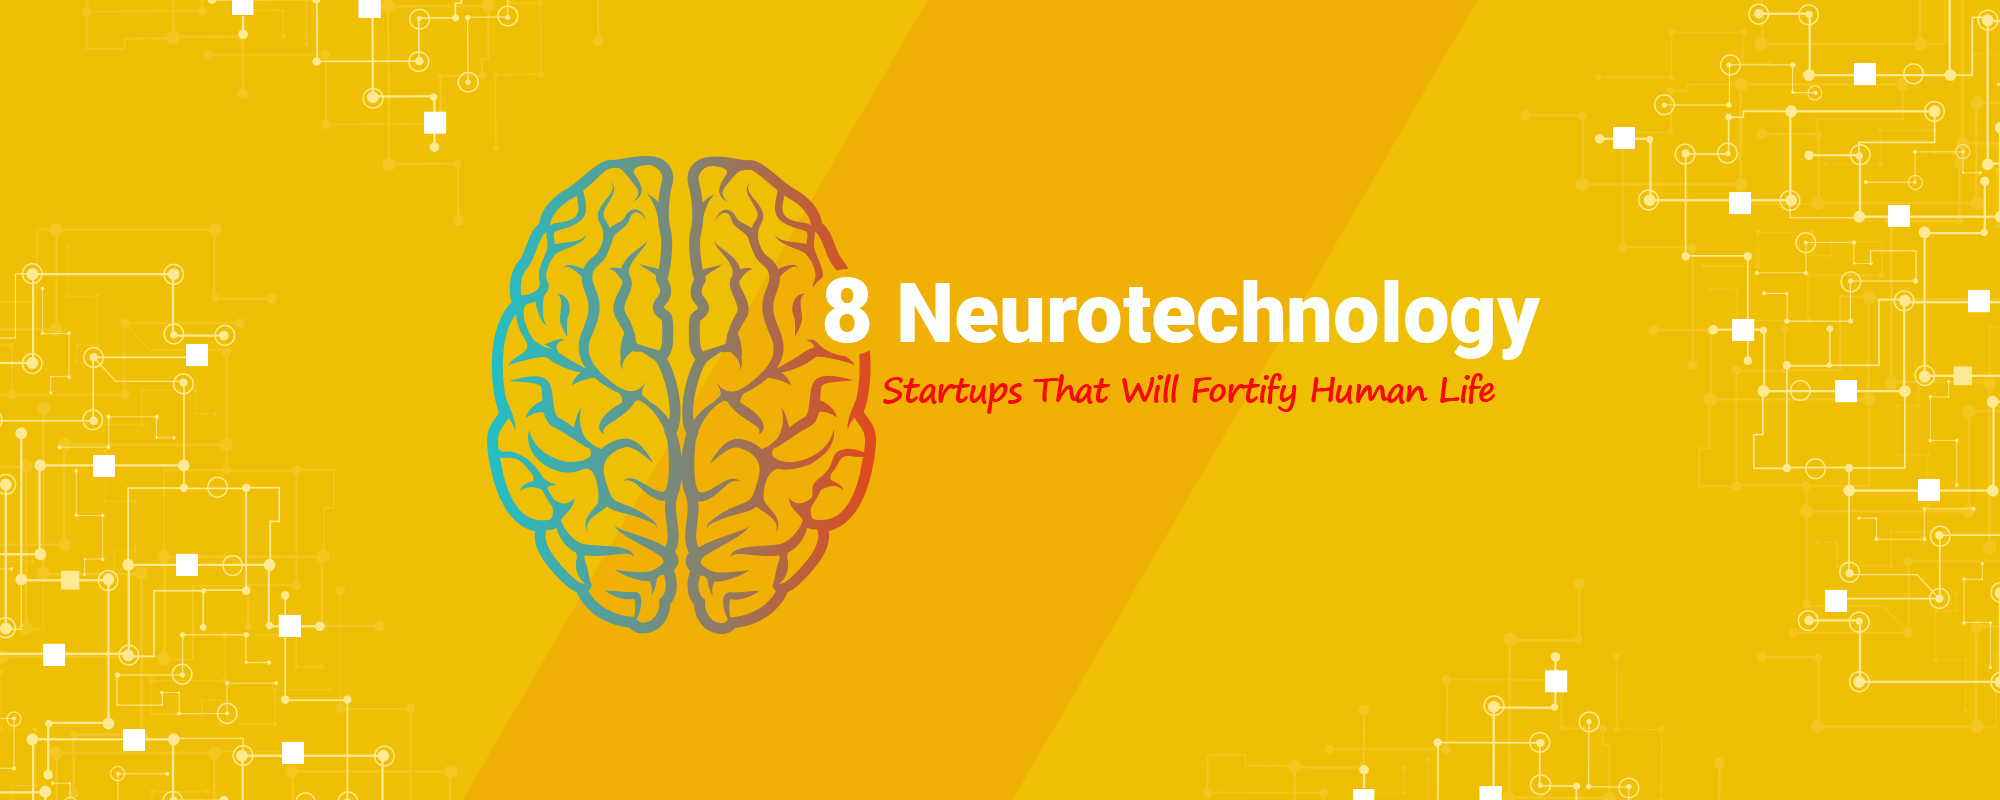 8 Neurotechnology Startups That Are Way Ahead Of Time